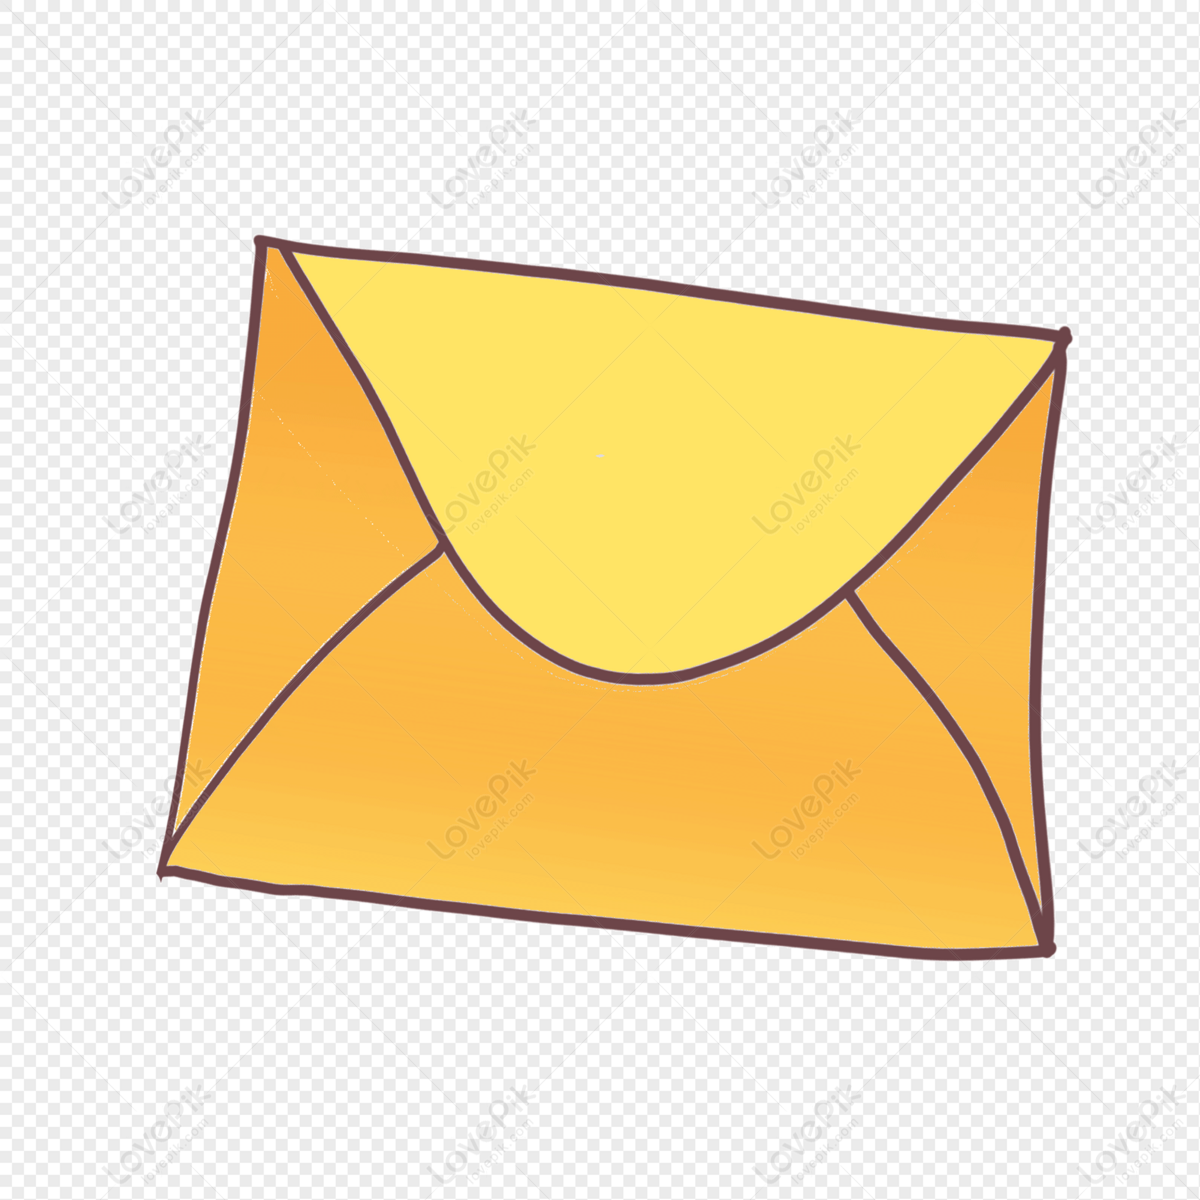 Yellow Cartoon Hand Painted Envelope PNG Transparent Image And Clipart  Image For Free Download - Lovepik | 401111507